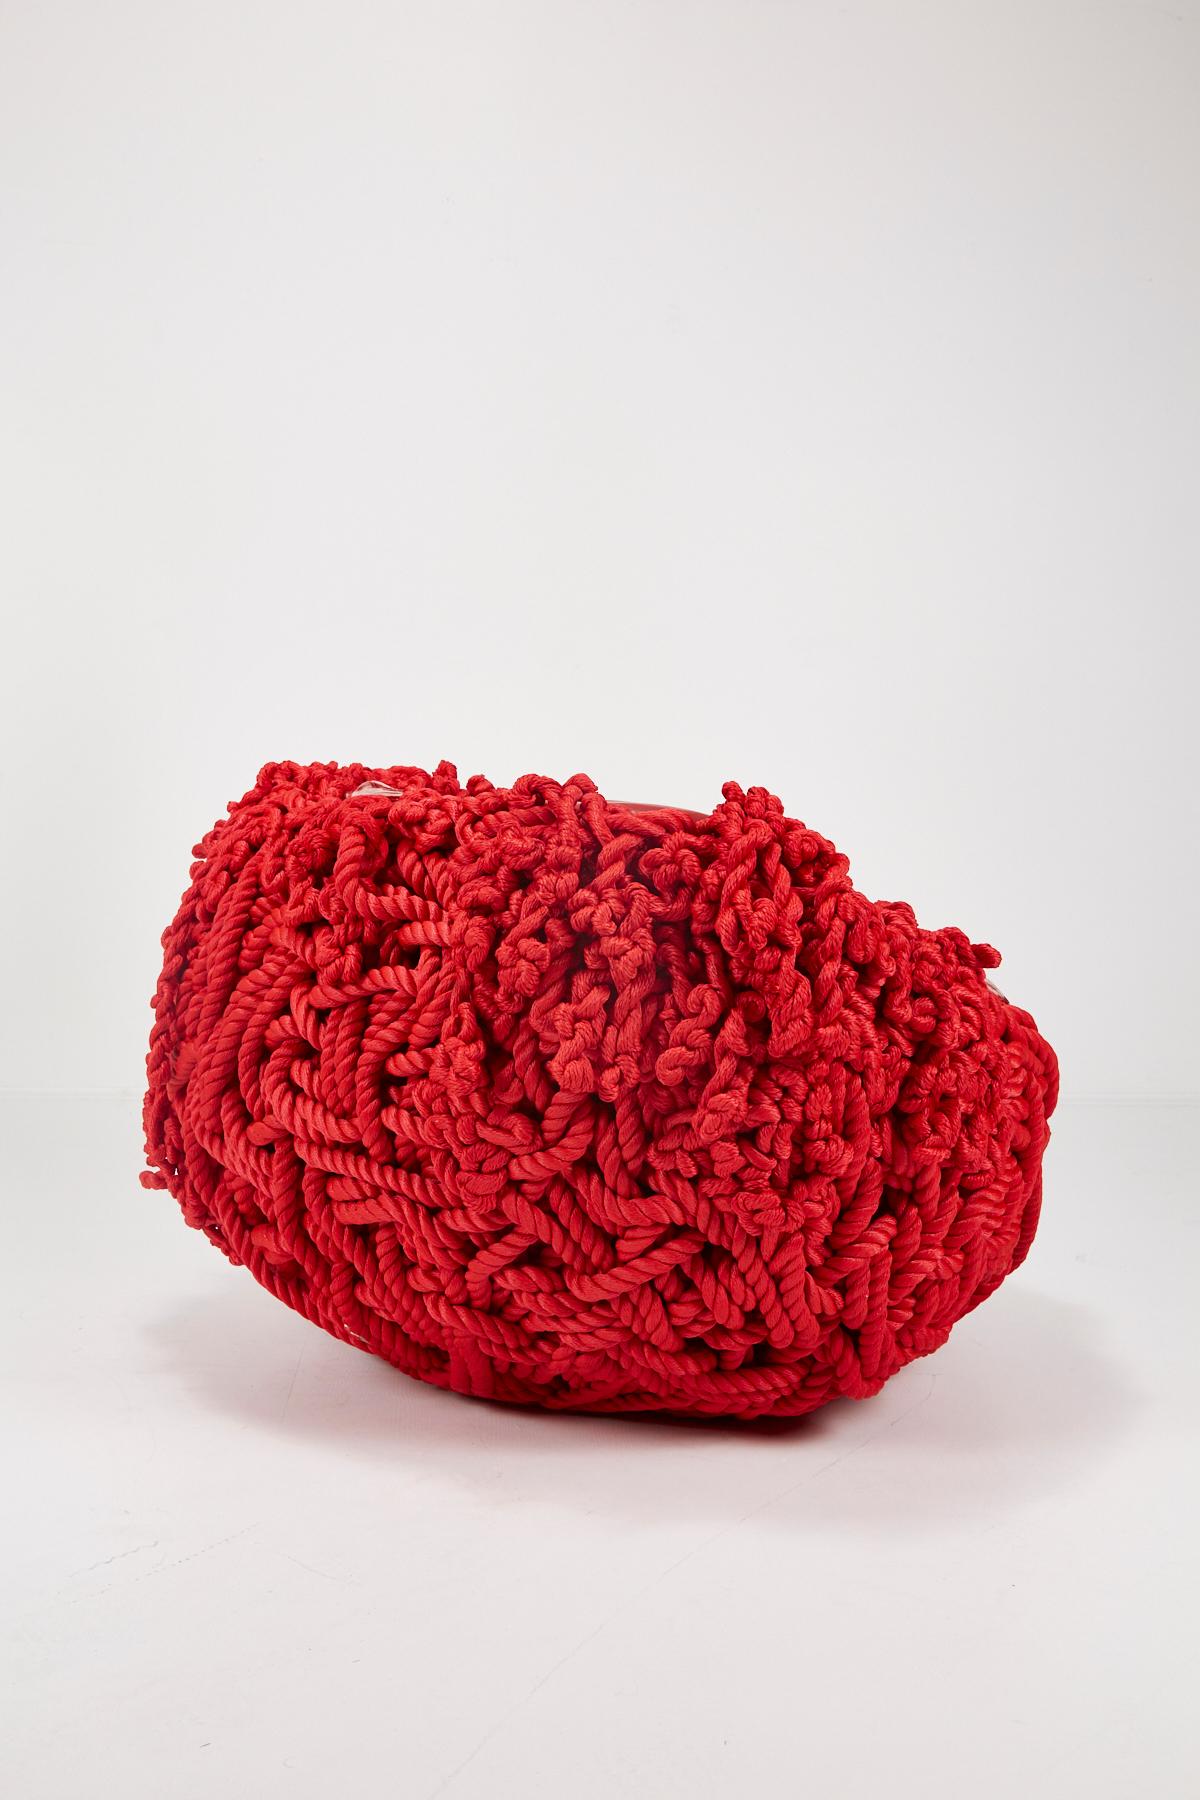 Meltdown Chair Pp Rope Red by Tom Price, 2017 1